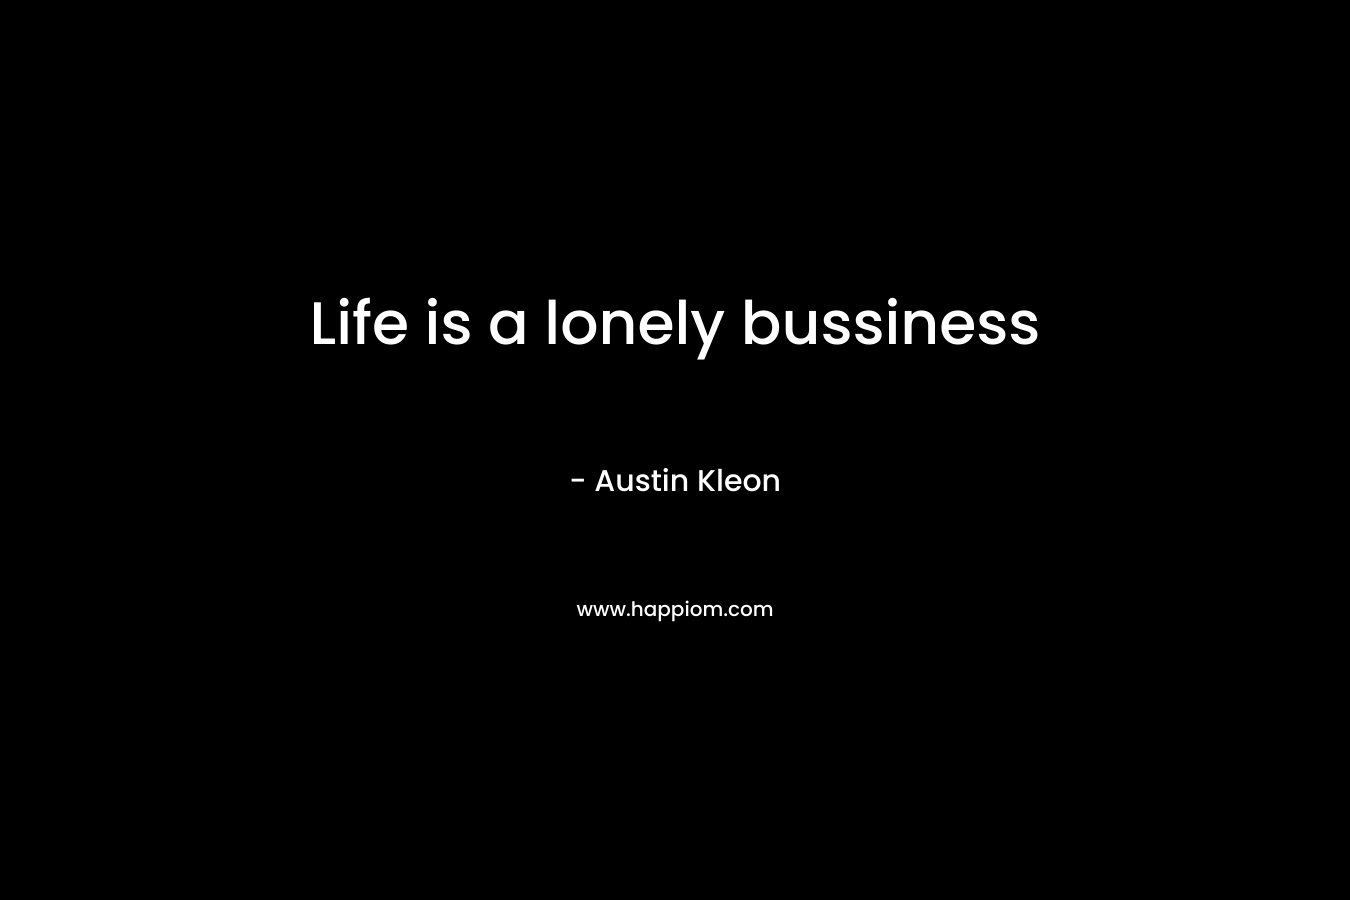 Life is a lonely bussiness